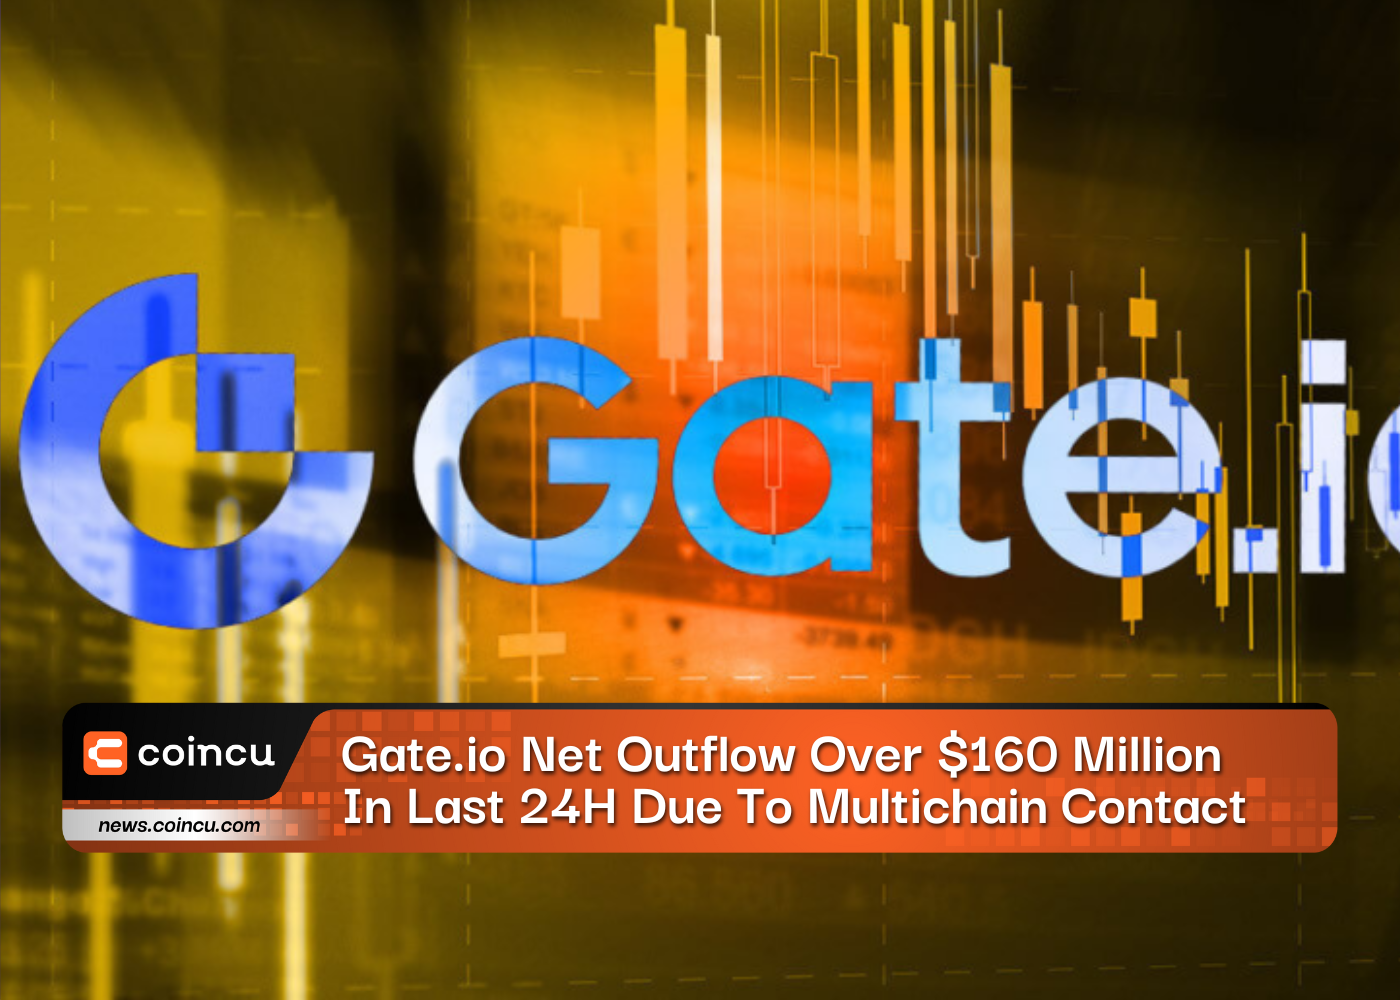 Gate.io Net Outflow Over $160 Million In Last 24H Due To Multichain Contact